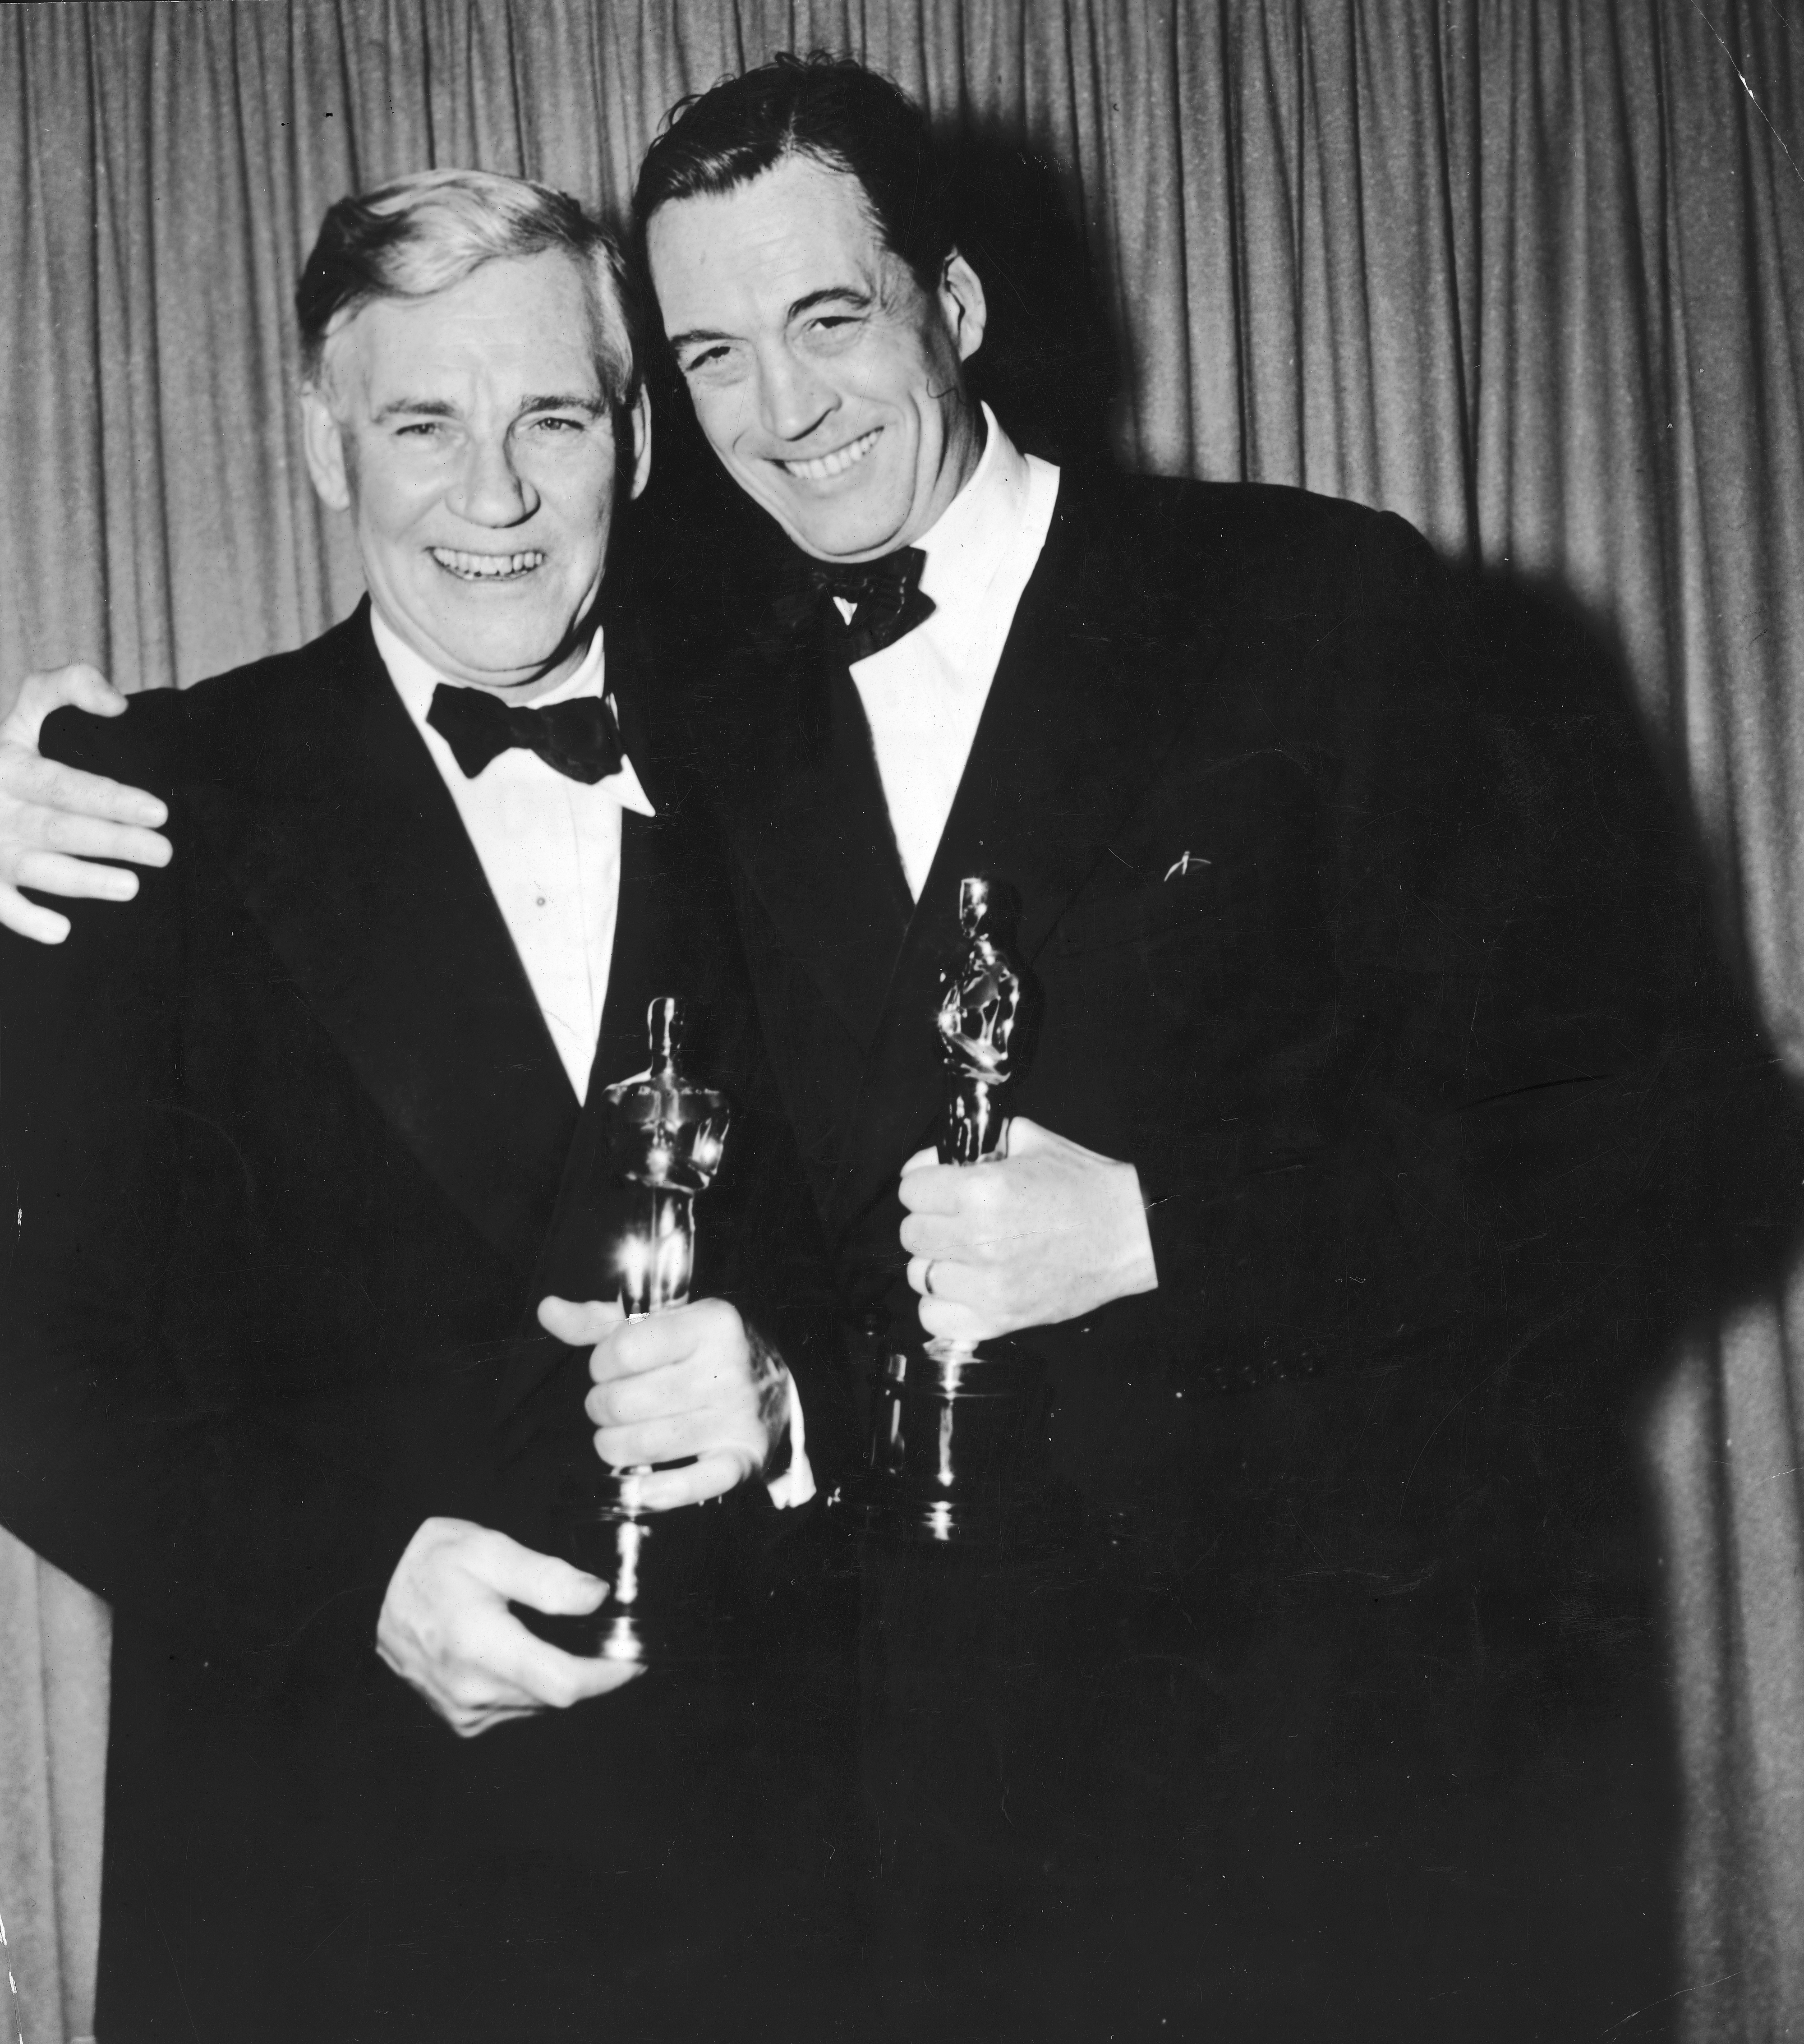 Two men in tuxedos holding award statues, smiling, with a curtain backdrop